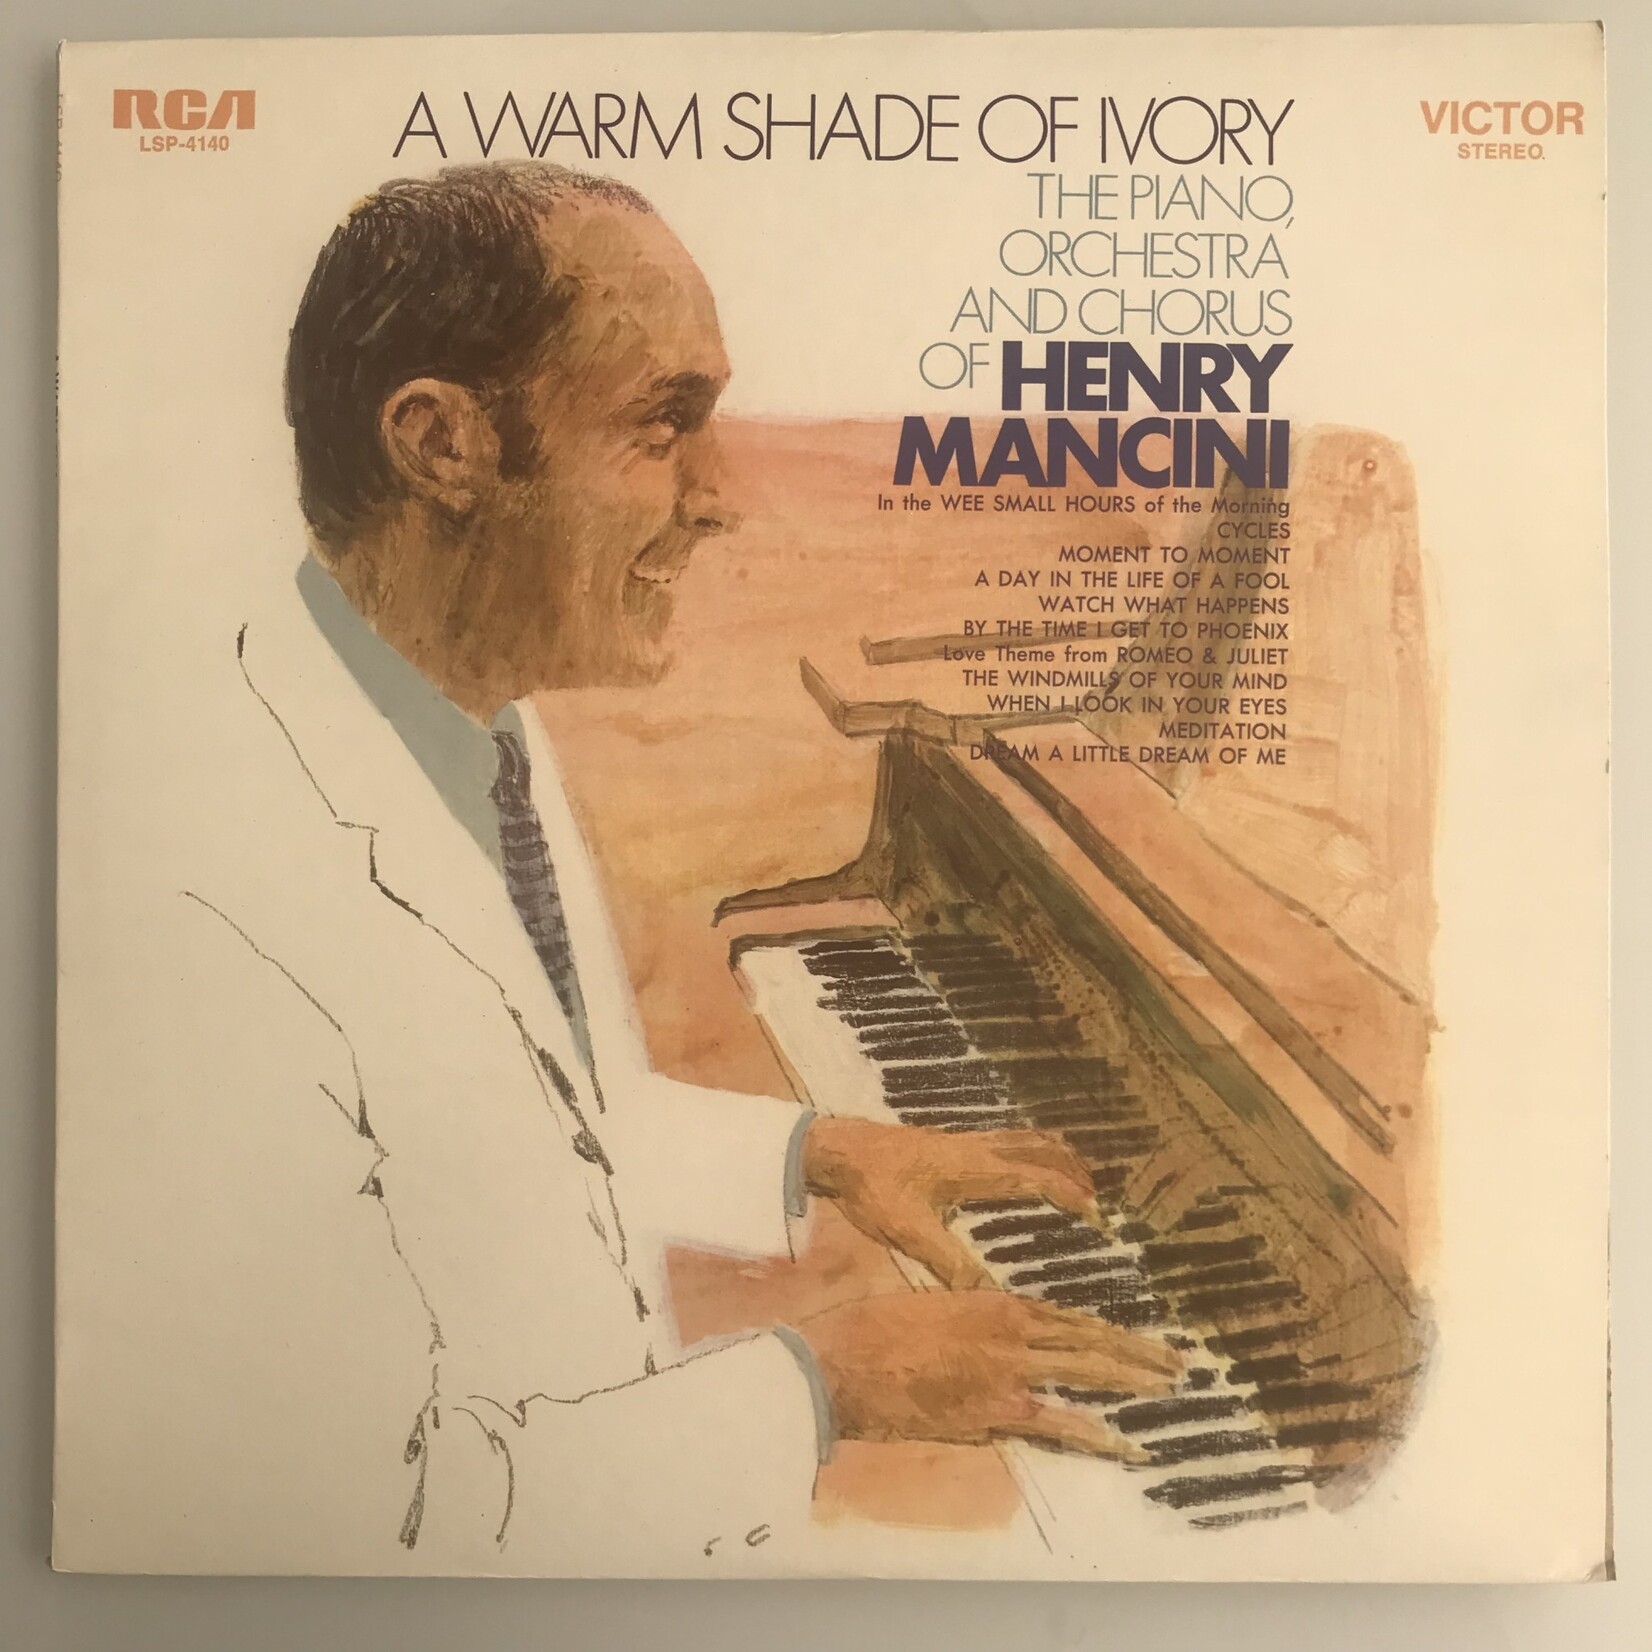 Henry Mancini - A Warm Shade Of Ivory - Vinyl LP (USED)